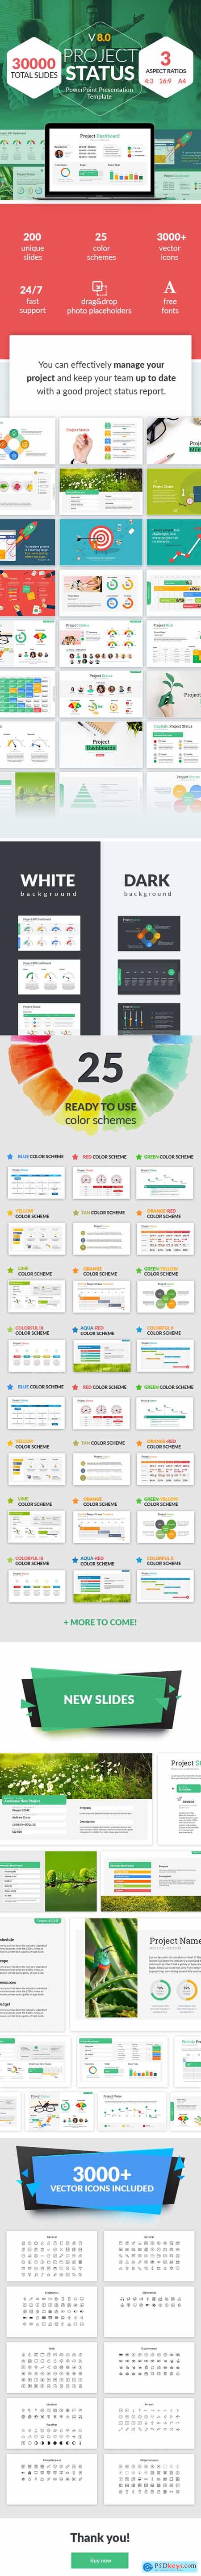 Project Status PowerPoint Presentation Template 11675969